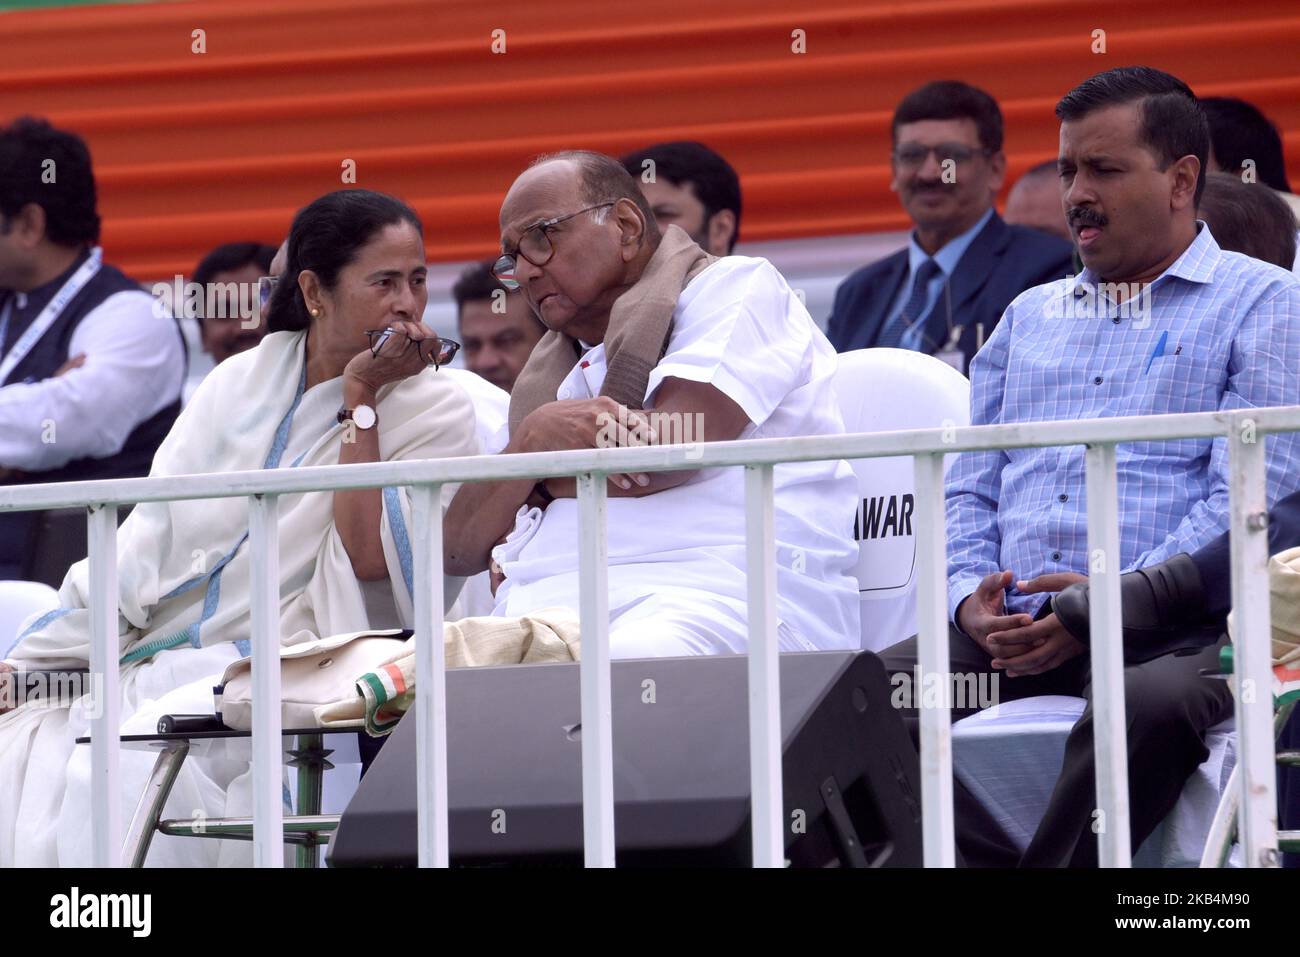 Mamata Banerjee Chief Minister of West Bengal and Chief of AITMC Political Party taking with NCP's Sharad Pawar and Delhi CM Arvind Kejriwal present during a rally attended by leaders from major Indian opposition parties in Kolkata, India, Saturday, Jan. 19, 2019. The rally has been attended by the leaders of twenty-two national and regional parties who oppose the ruling Bharatiya Janata Party (BJP) government. (Photo by Debajyoti Chakraborty/NurPhoto) Stock Photo